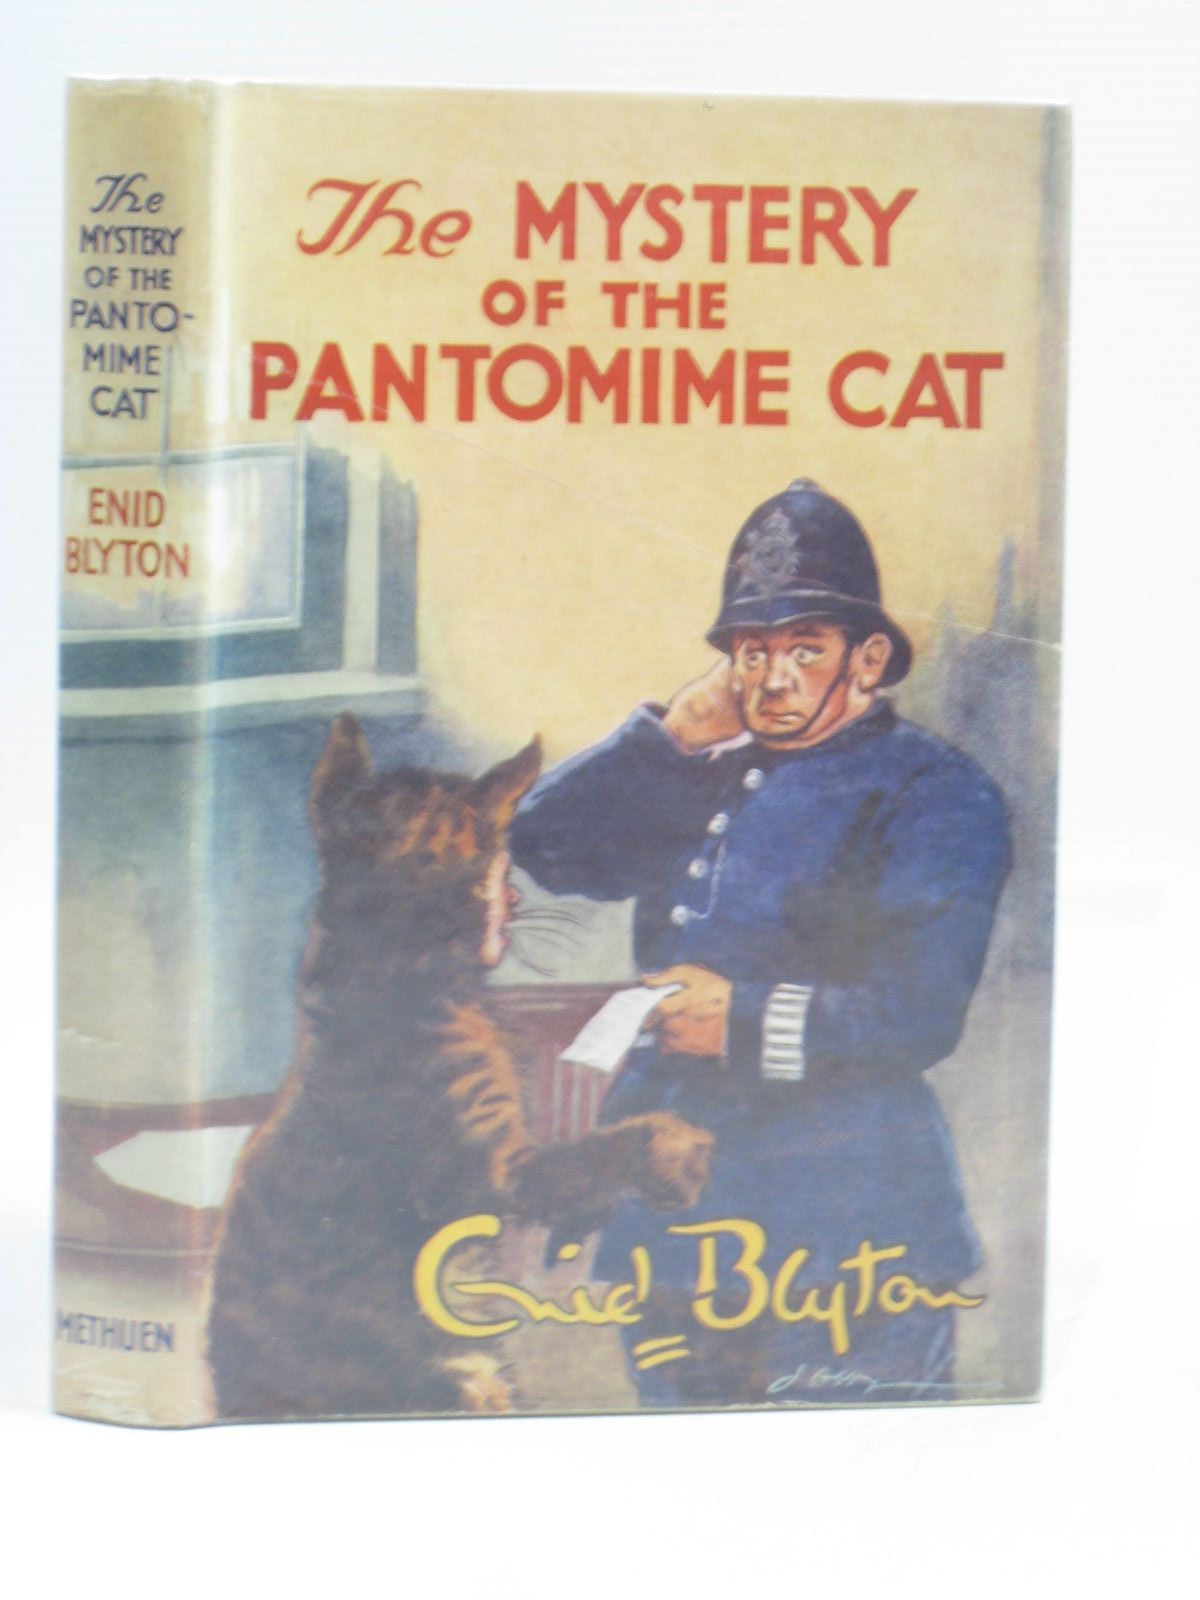 Cover of THE MYSTERY OF THE PANTOMIME CAT by Enid Blyton